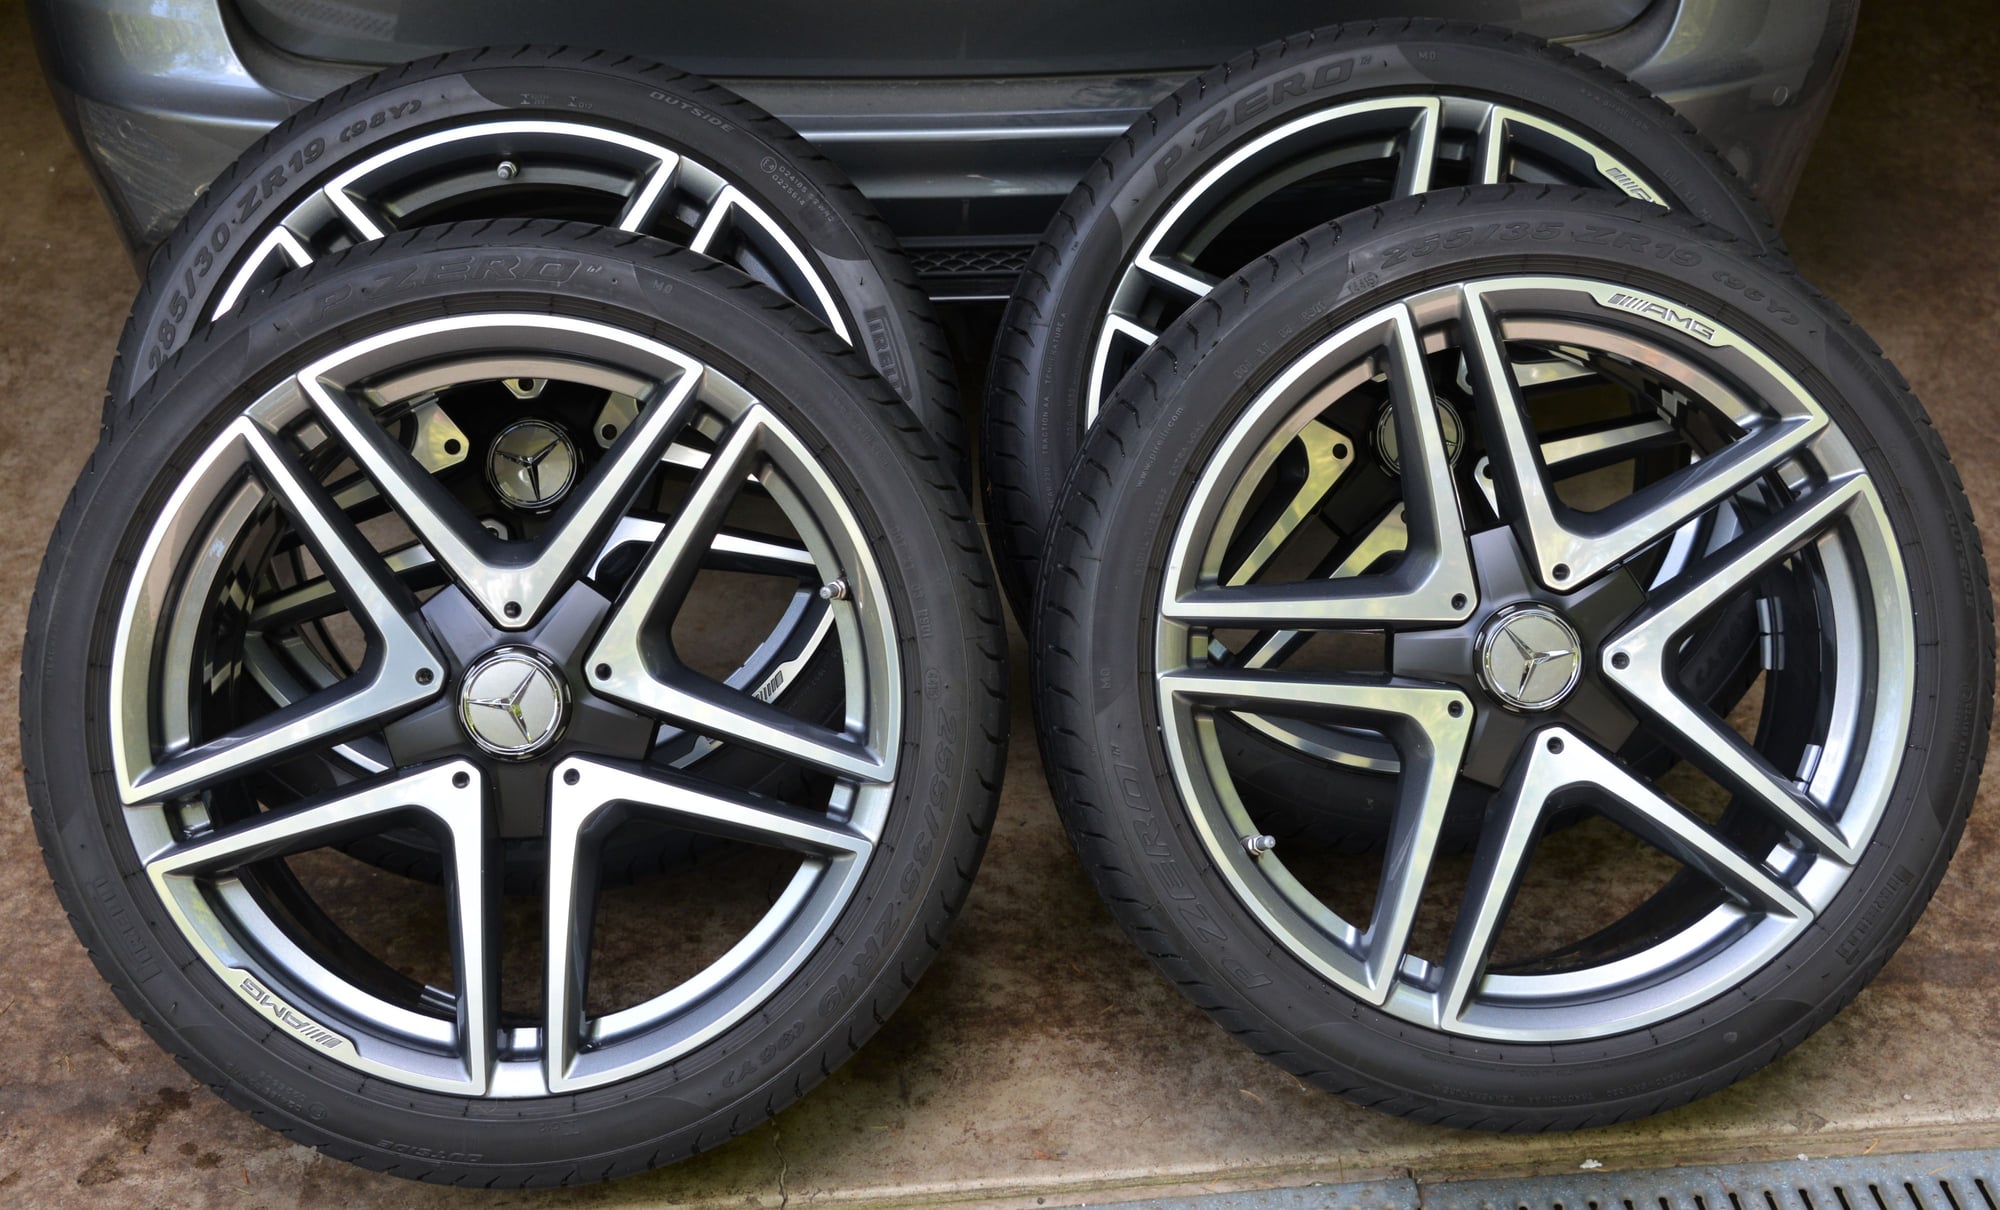 Wheels and Tires/Axles - Mercedes/AMG 19" OEM Forged Wheels and Tires - Like New - Used - All Years Mercedes-Benz E63 AMG - Sherwood, OR 97140, United States